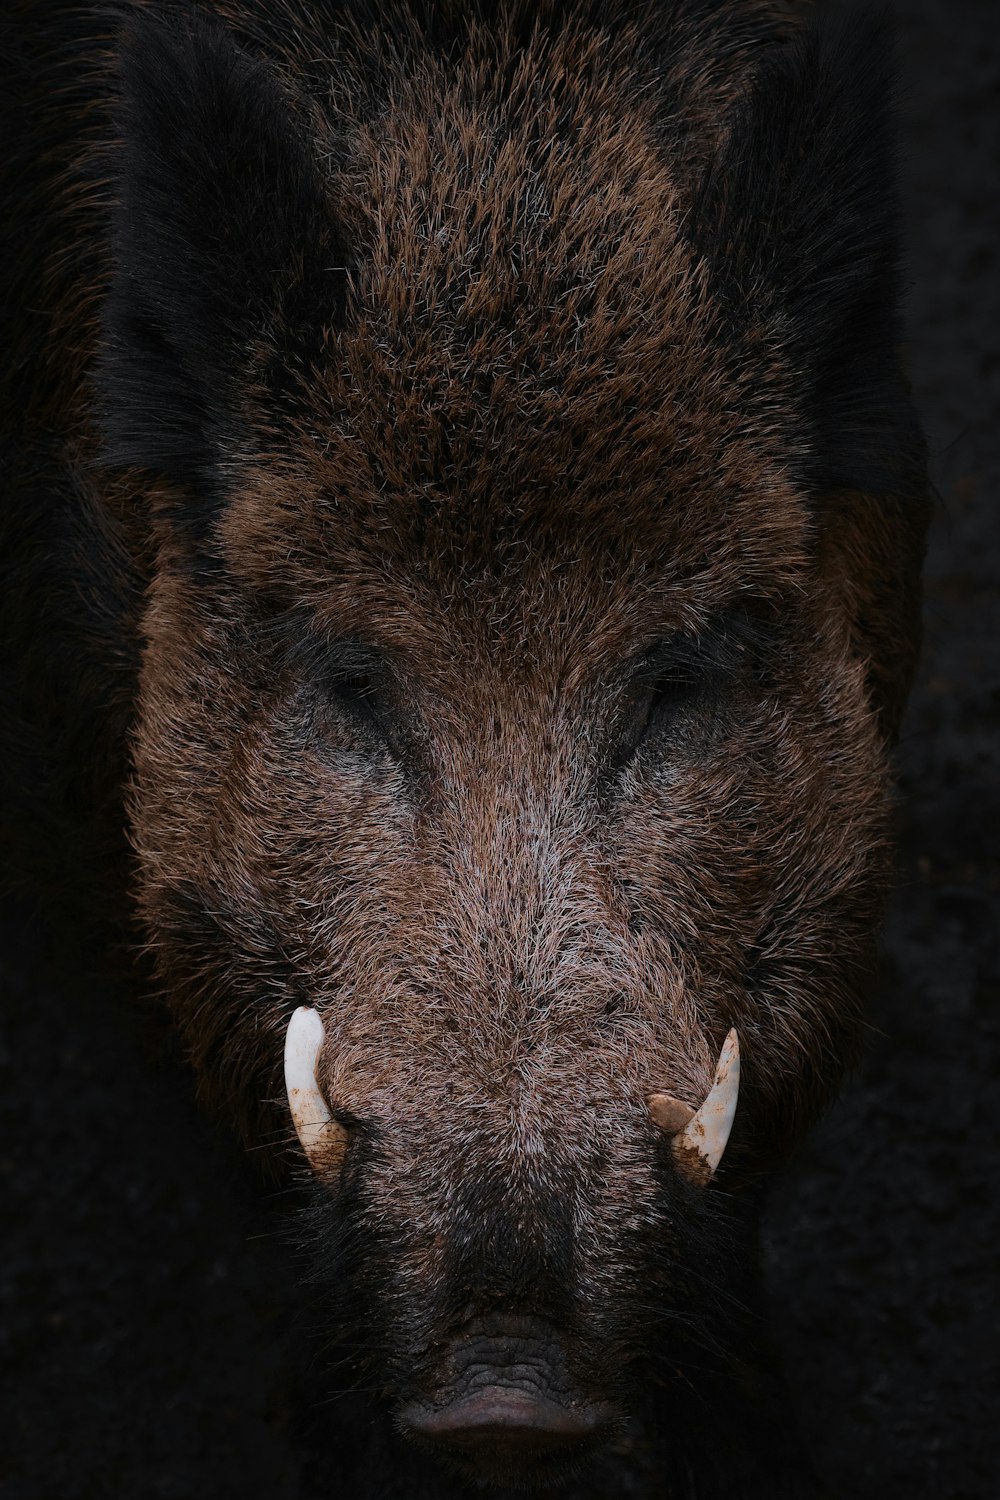 a close up of a boar's head with horns